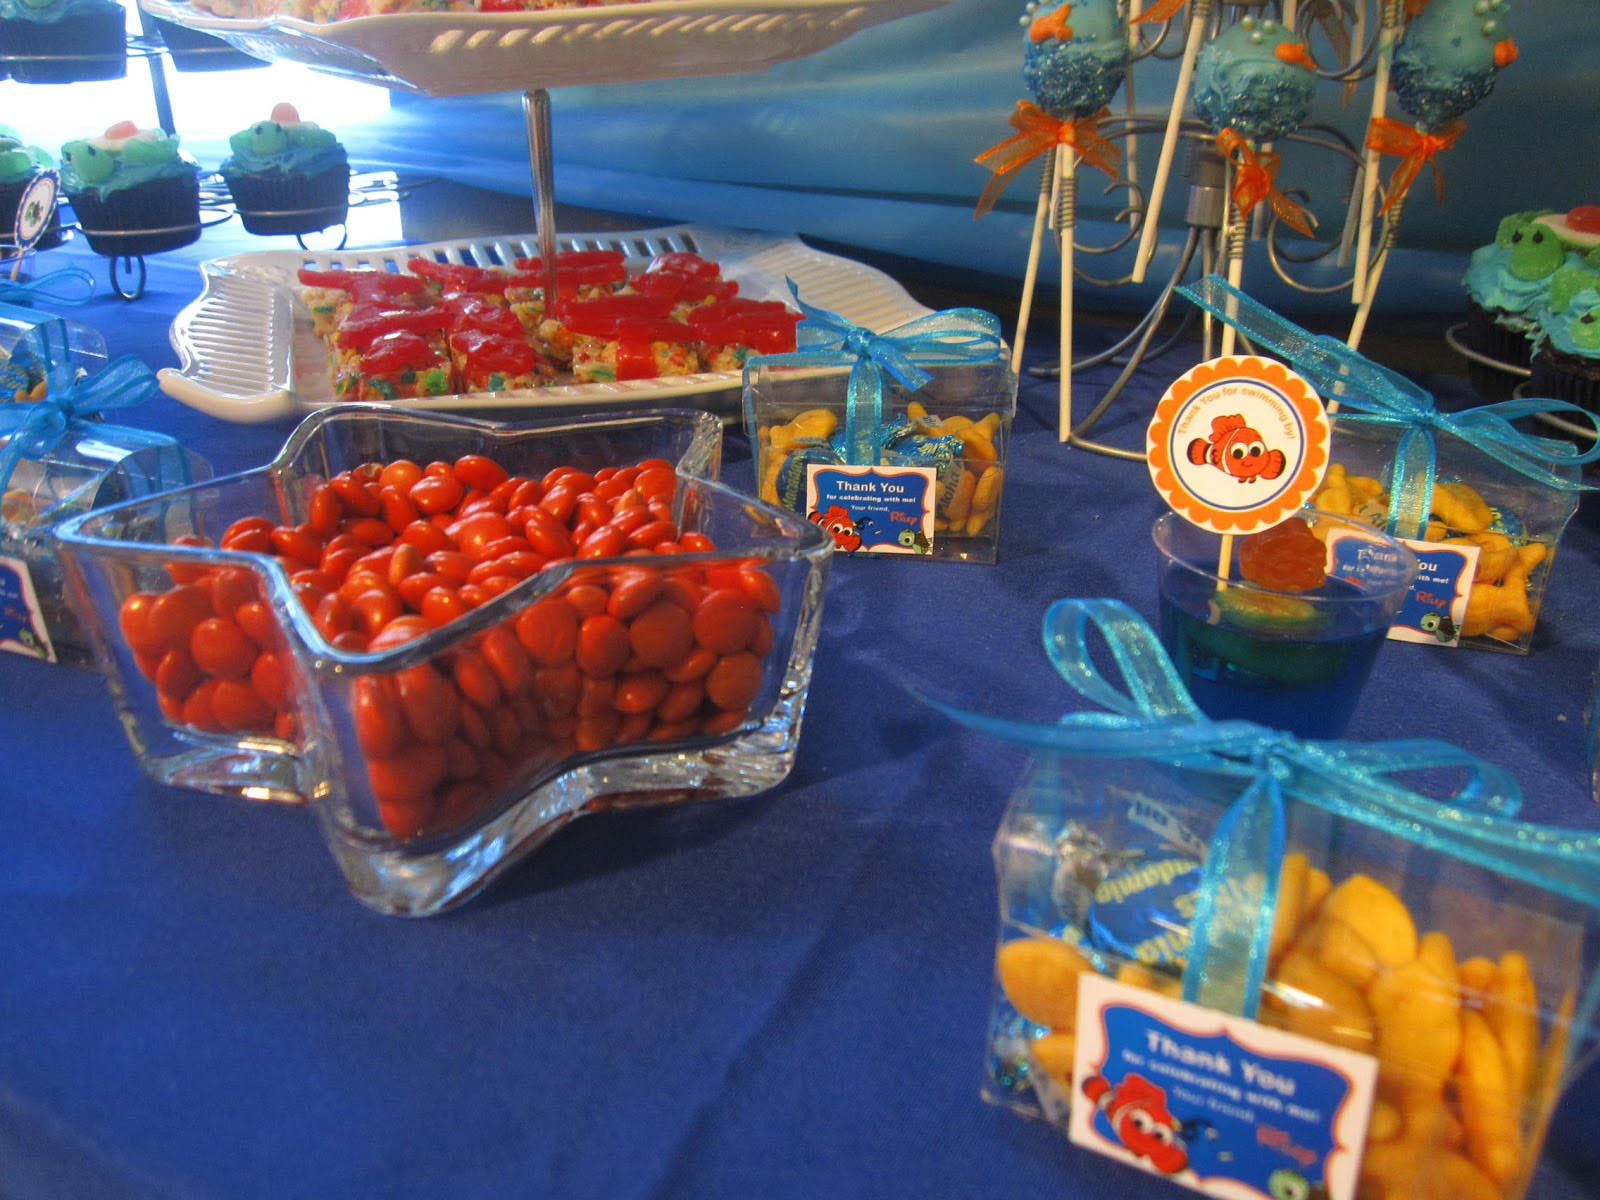 Finding Nemo Party Food Ideas
 Travel in the Ocean at a Nemo Birthday Party